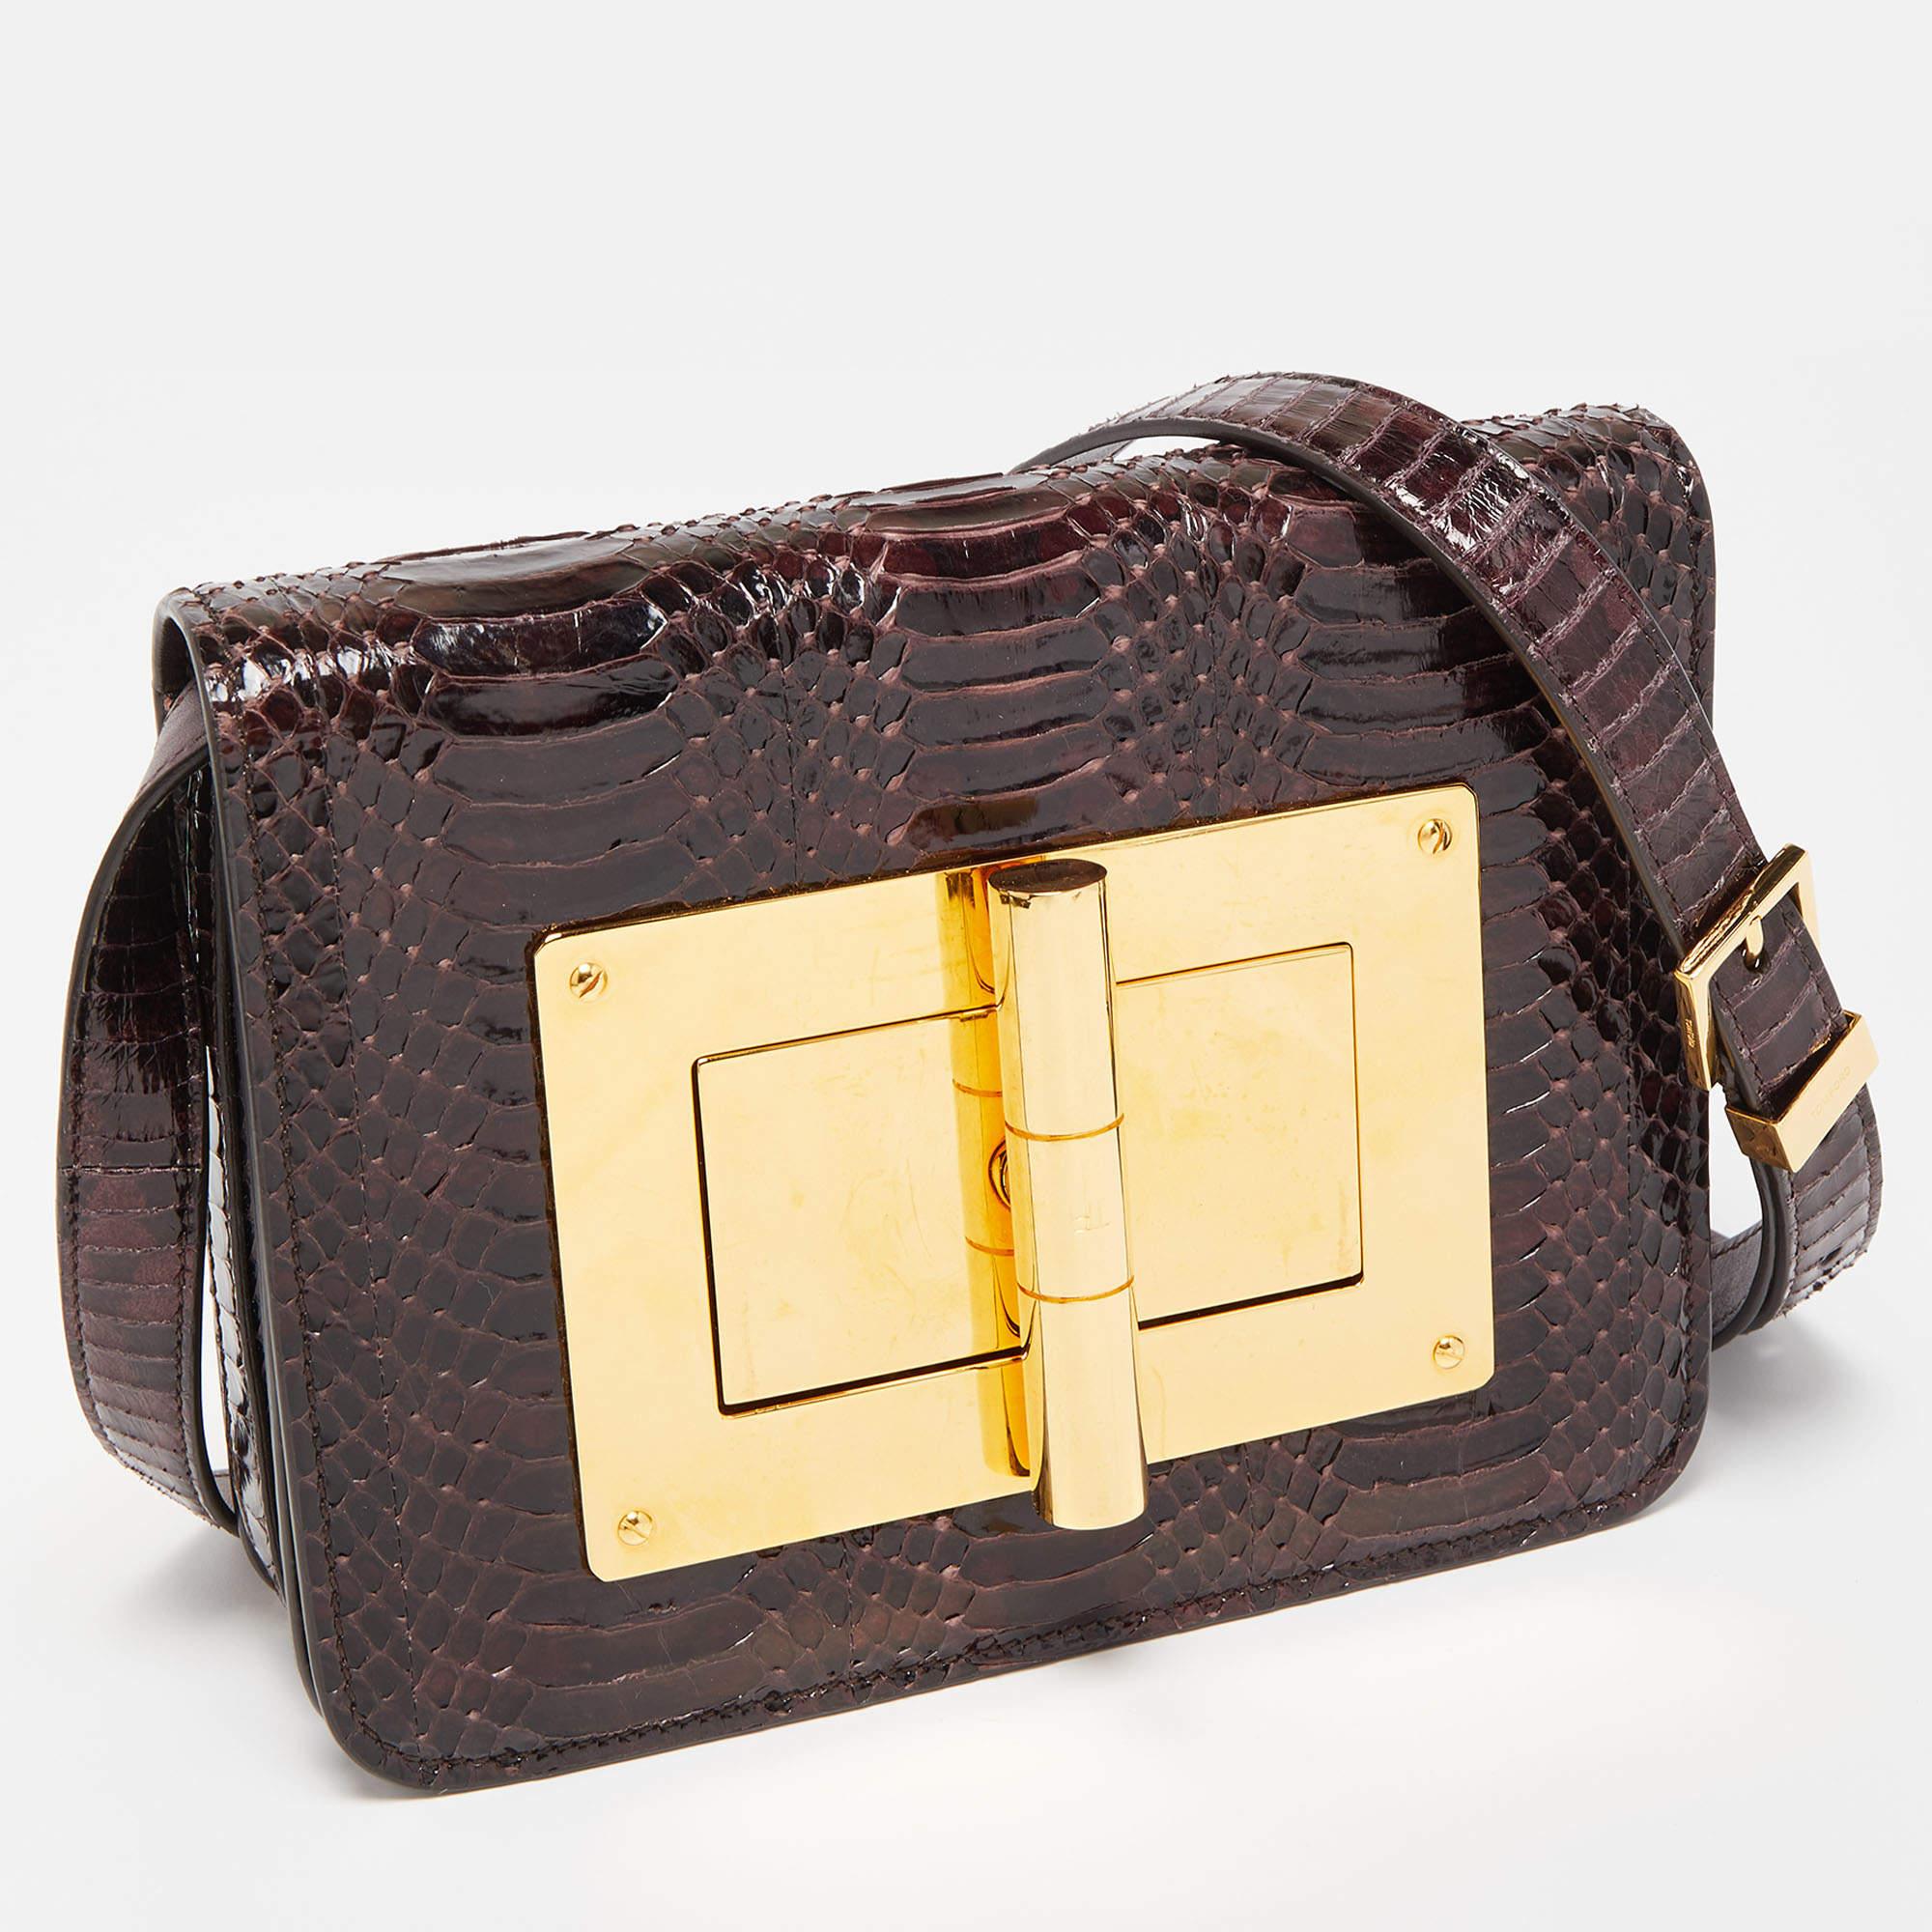 Trust this Tom Ford bag to be light, durable, and comfortable to carry. Crafted from exotic leather, it comes in a dark burgundy hue. It features an Alcantara interior, a long strap, and the signature twist lock at the front.

